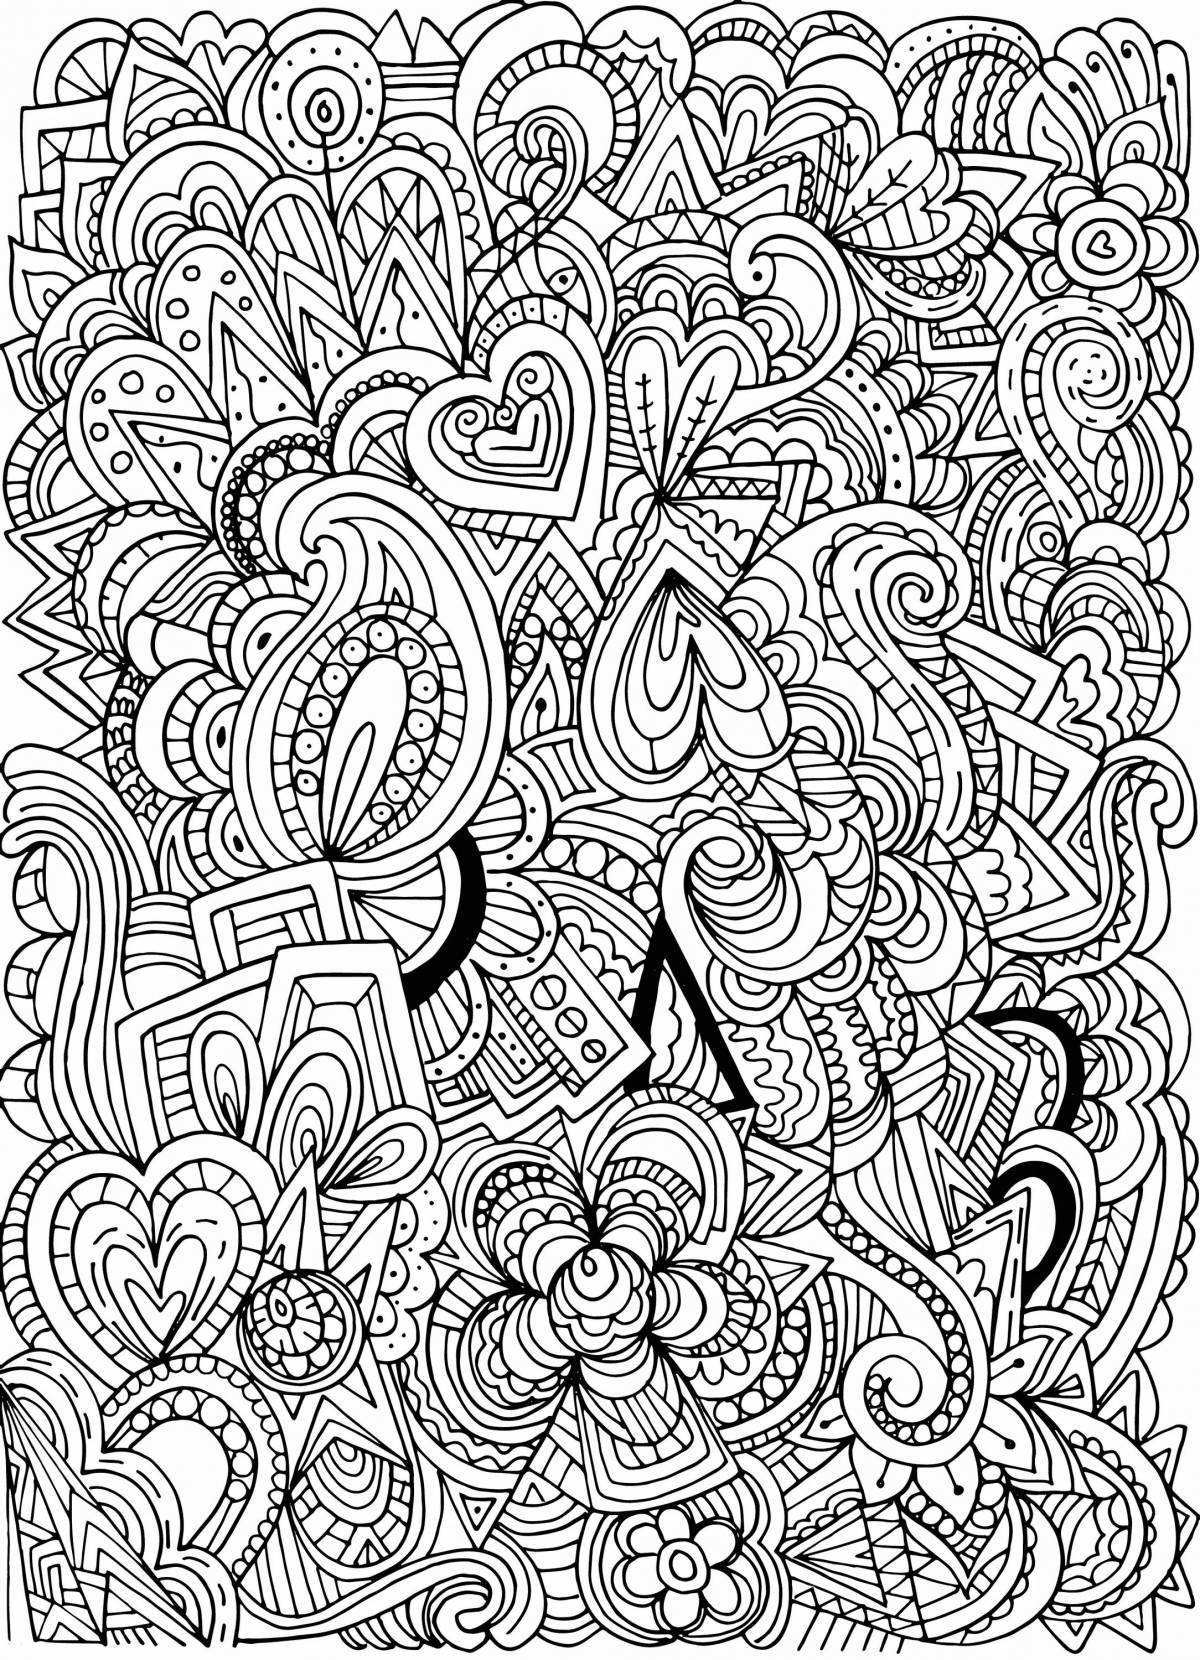 Exquisite anti-stress coloring page 18